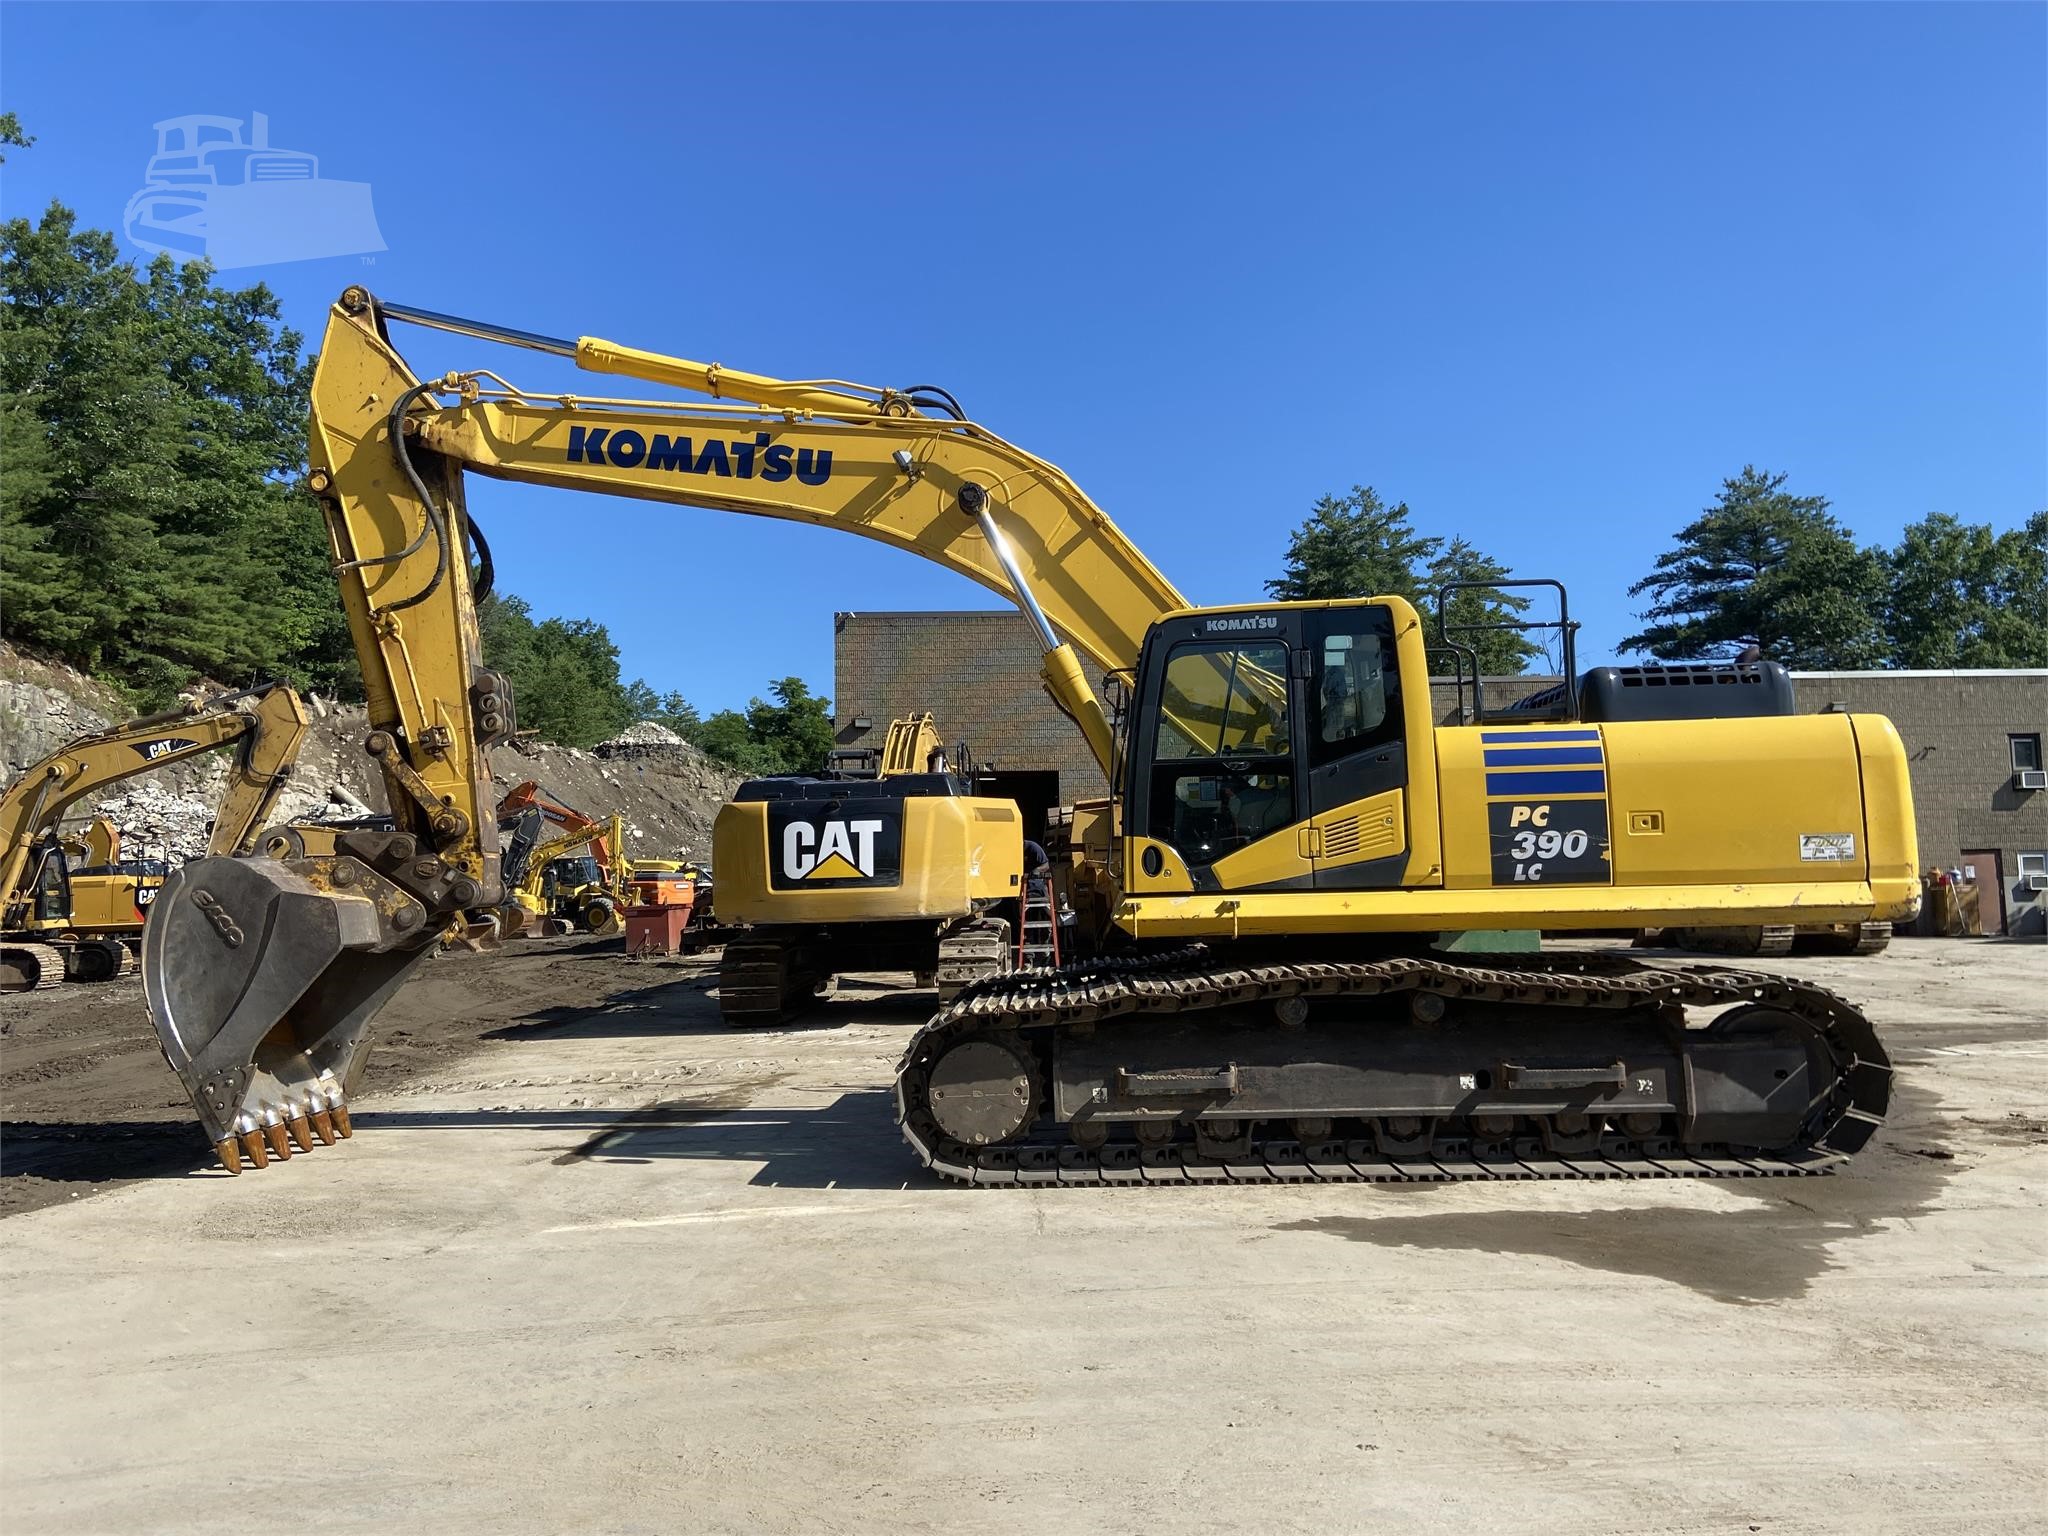 12 Komatsu Pc390 Lc 10 For Sale In Londonderry New Hampshire Machinerytrader Com